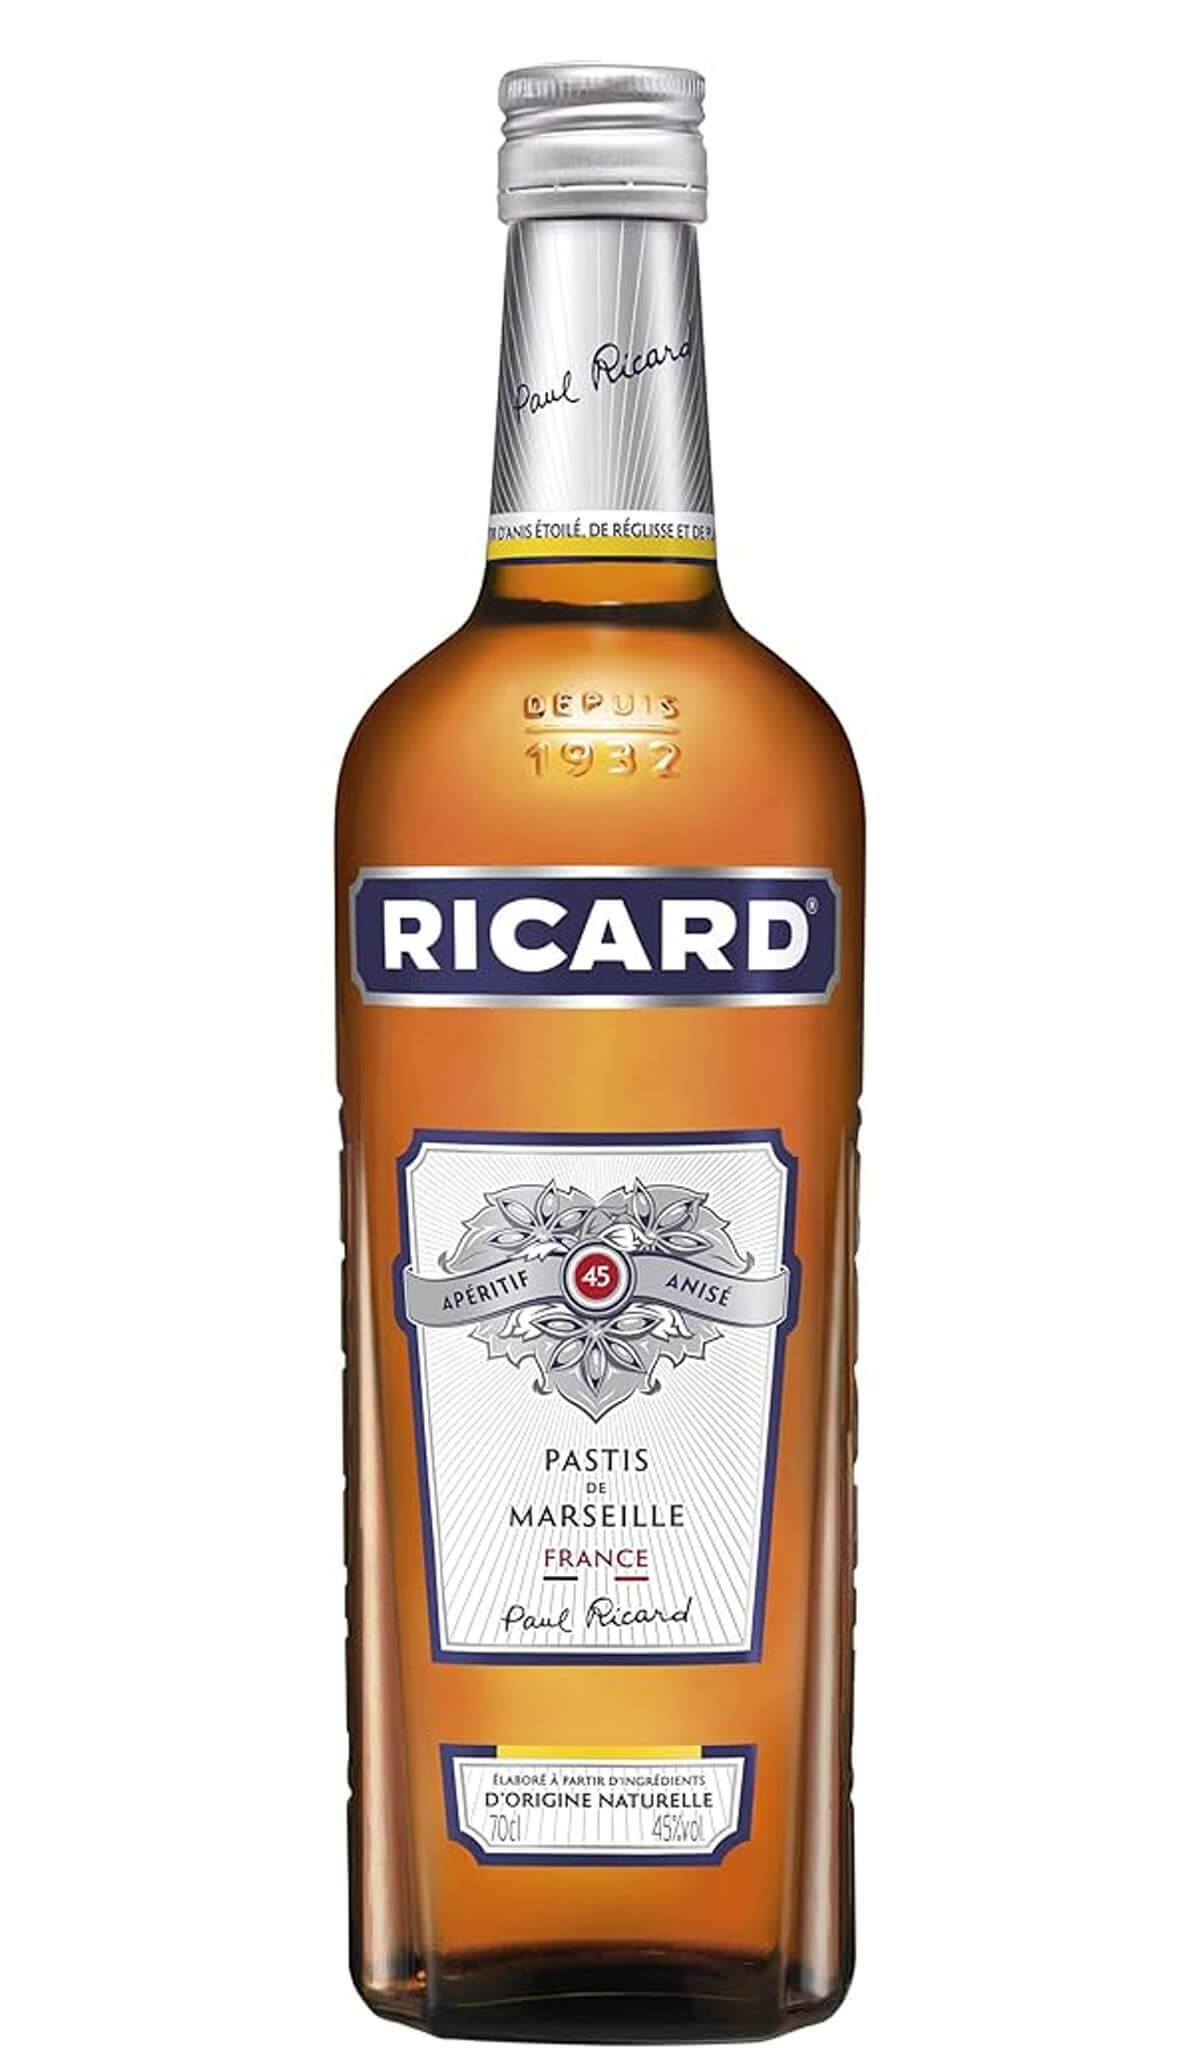 Find out more or buy Ricard Aperitif Liqueur 700ml (France) online at Wine Sellers Direct - Australia’s independent liquor specialists.